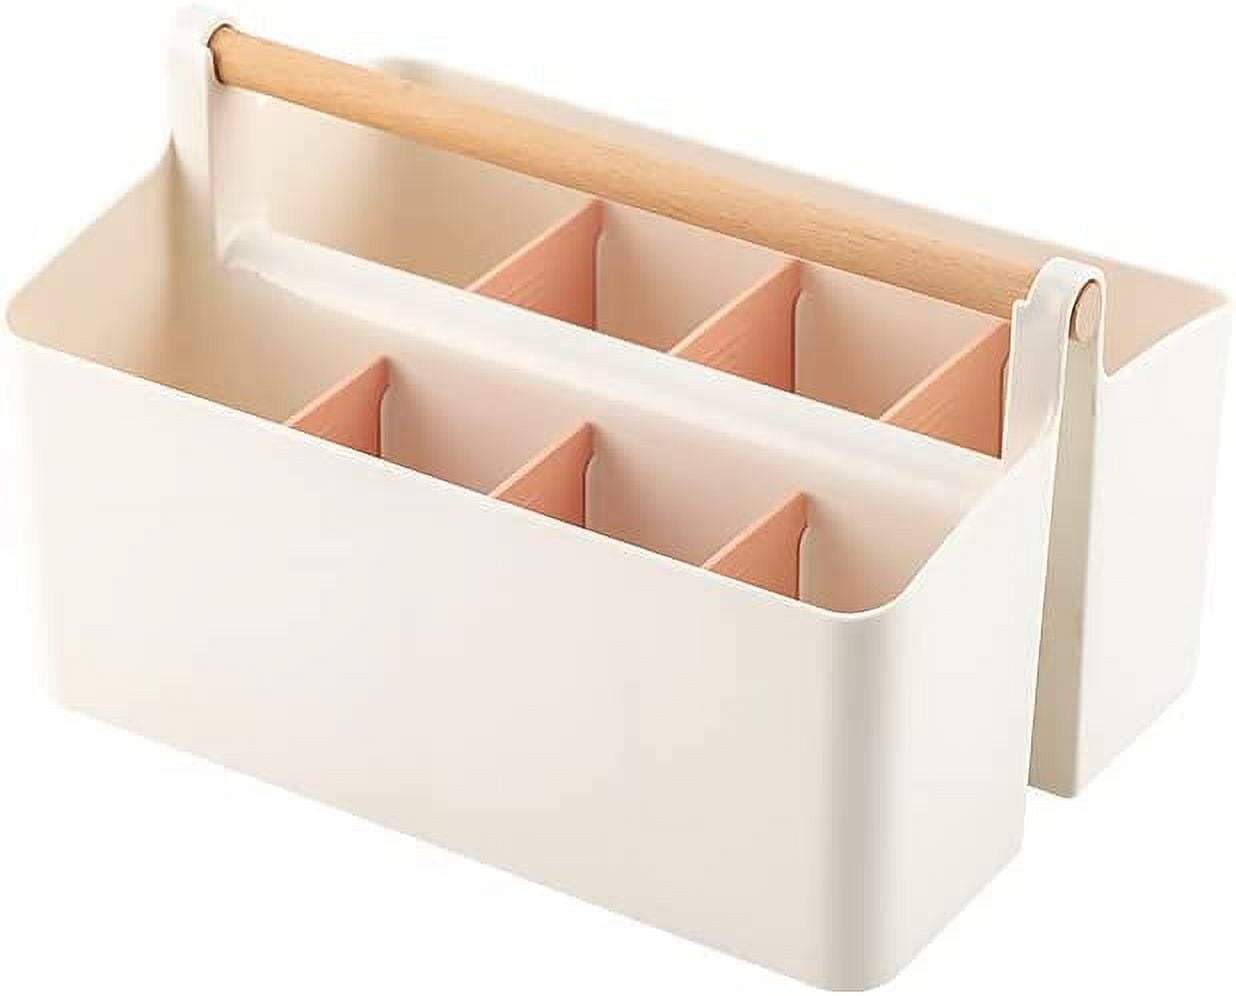 2-compartment Maid Caddy with Handle (Gray), Size: 16 W x 9 D x 5 H